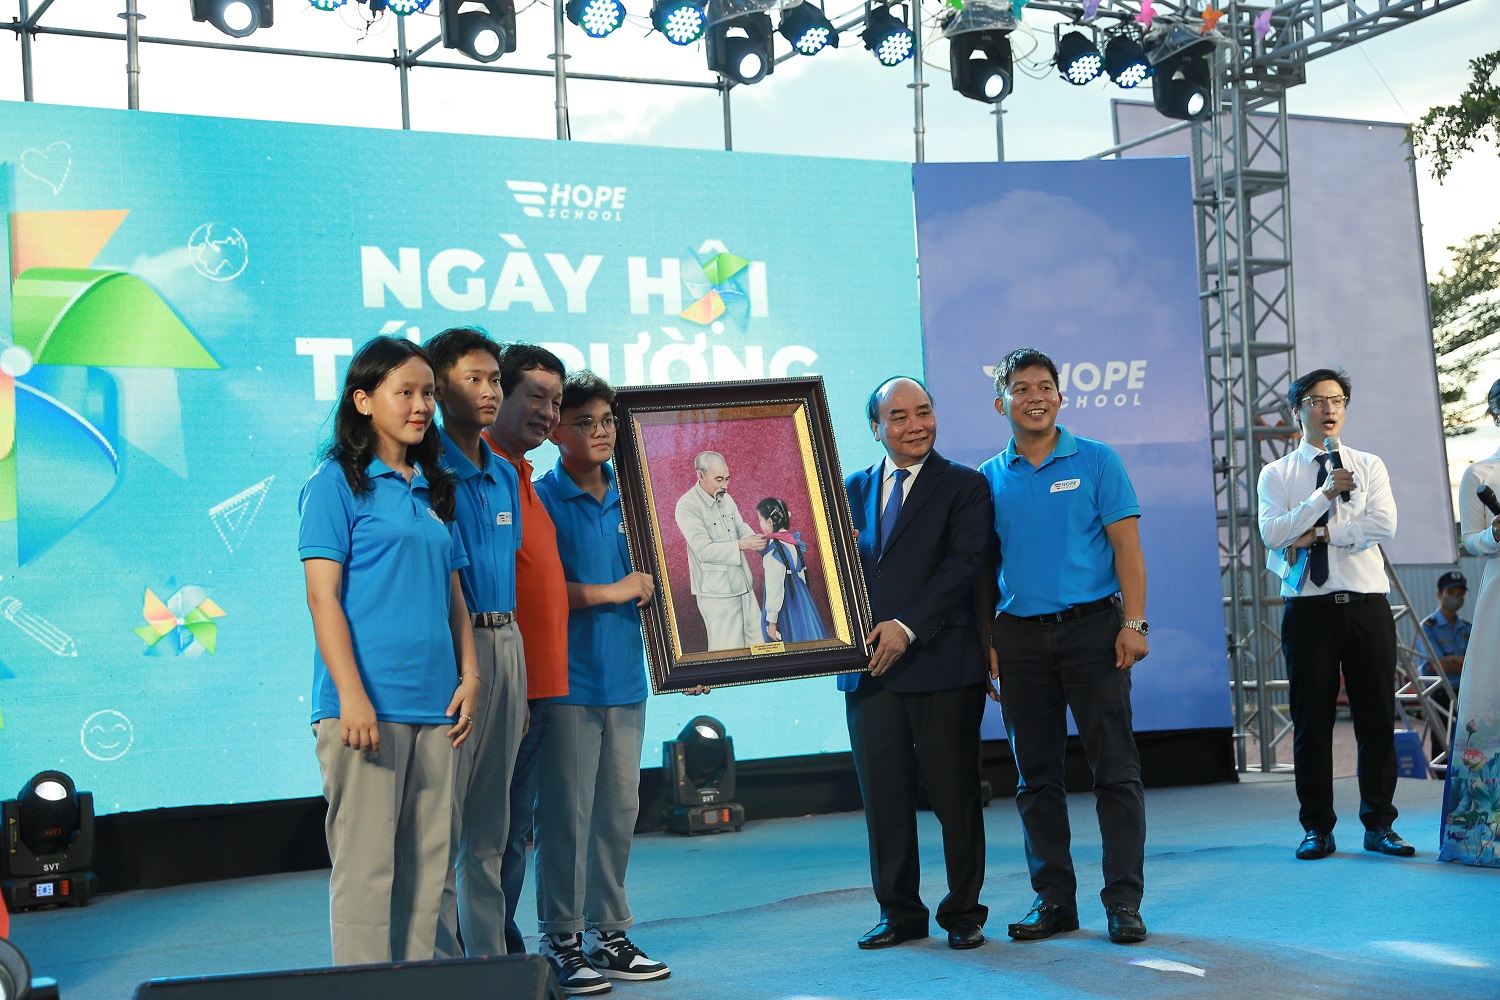 President Nguyen Xuan Phuc gave the painting "Uncle Ho and children" to Hope school's teachers and students